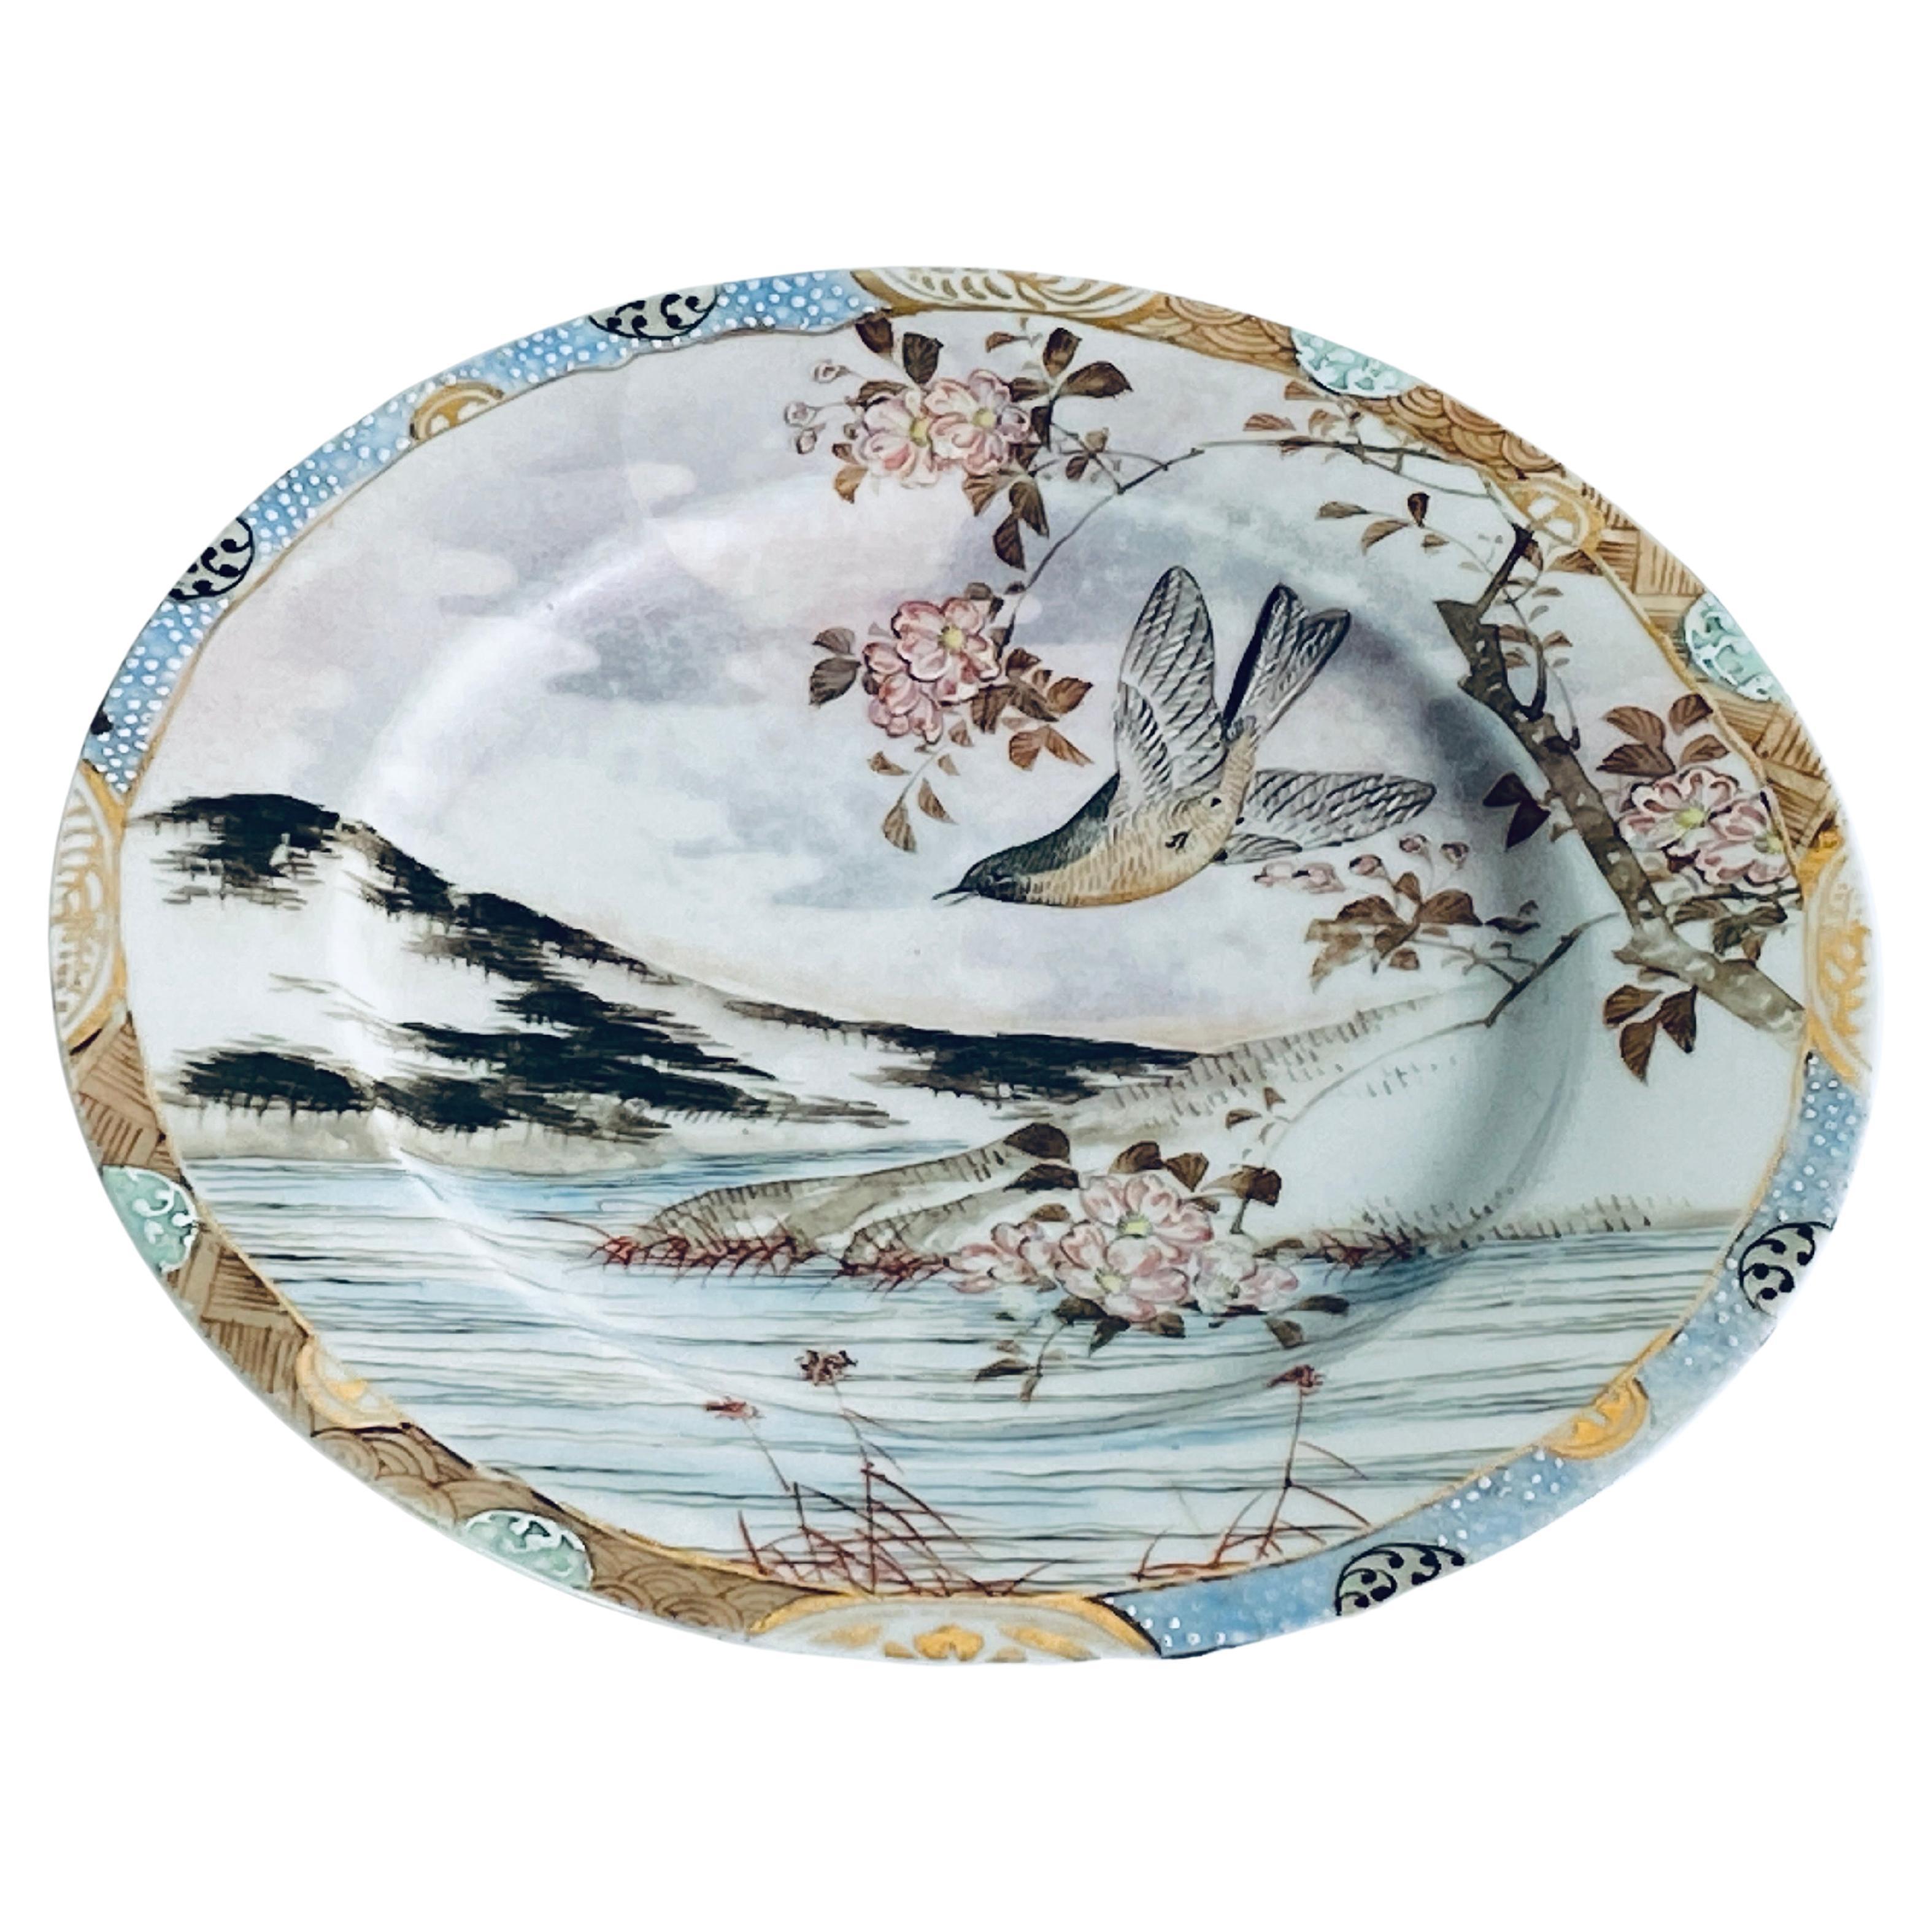 Fine Chinese Export Porcelain Plate